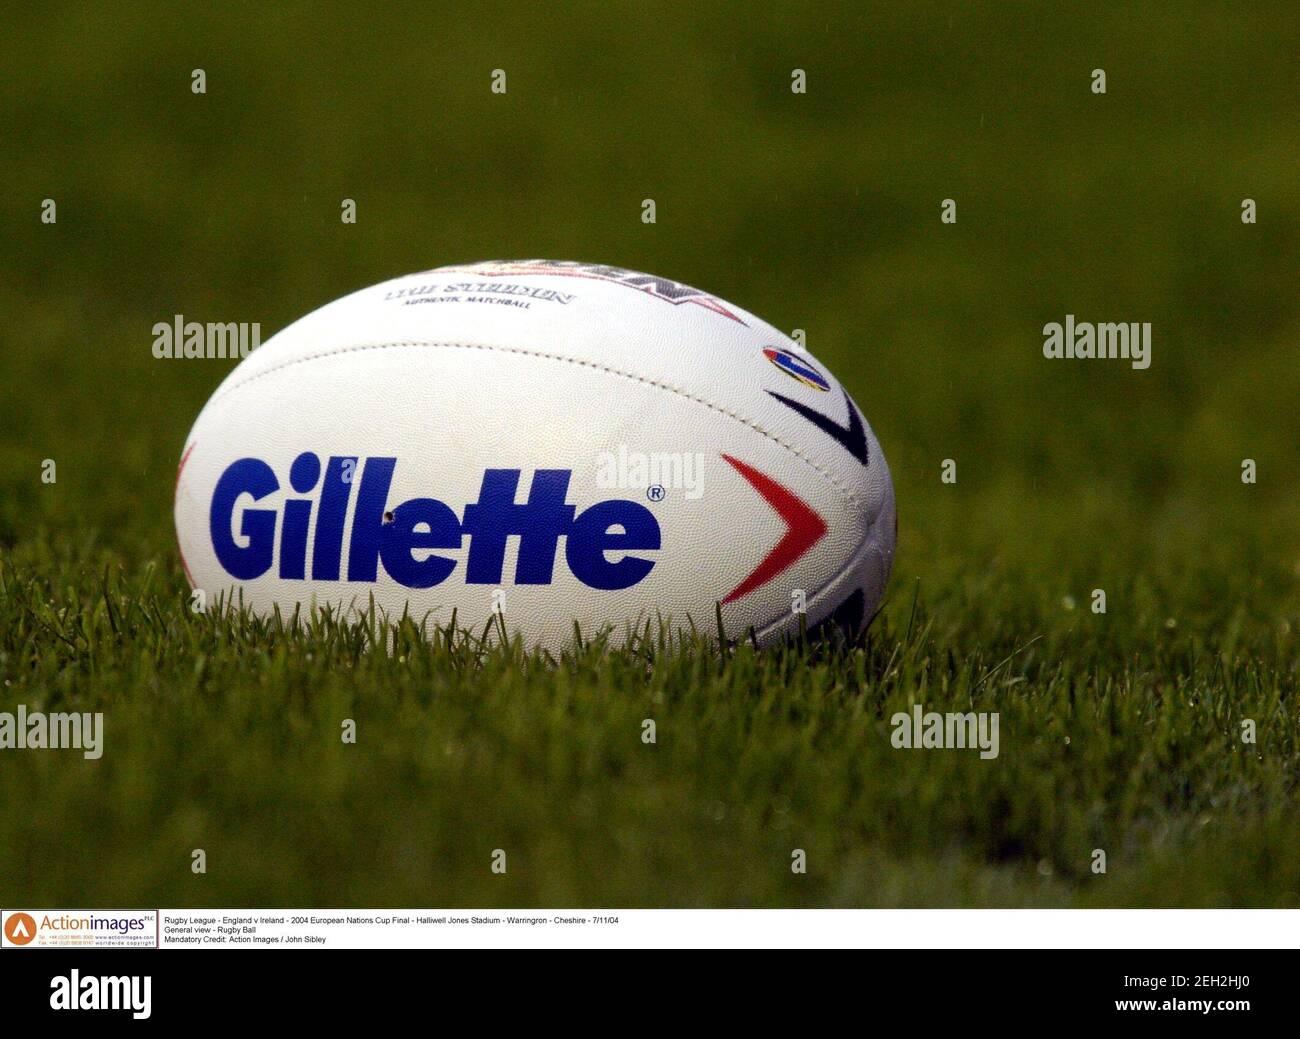 Rugby League - England v Ireland - 2004 European Nations Cup Final - Halliwell Jones Stadium - Warringron - Cheshire - 7/11/04  General view - Rugby Ball  Mandatory Credit: Action Images / John Sibley Stock Photo